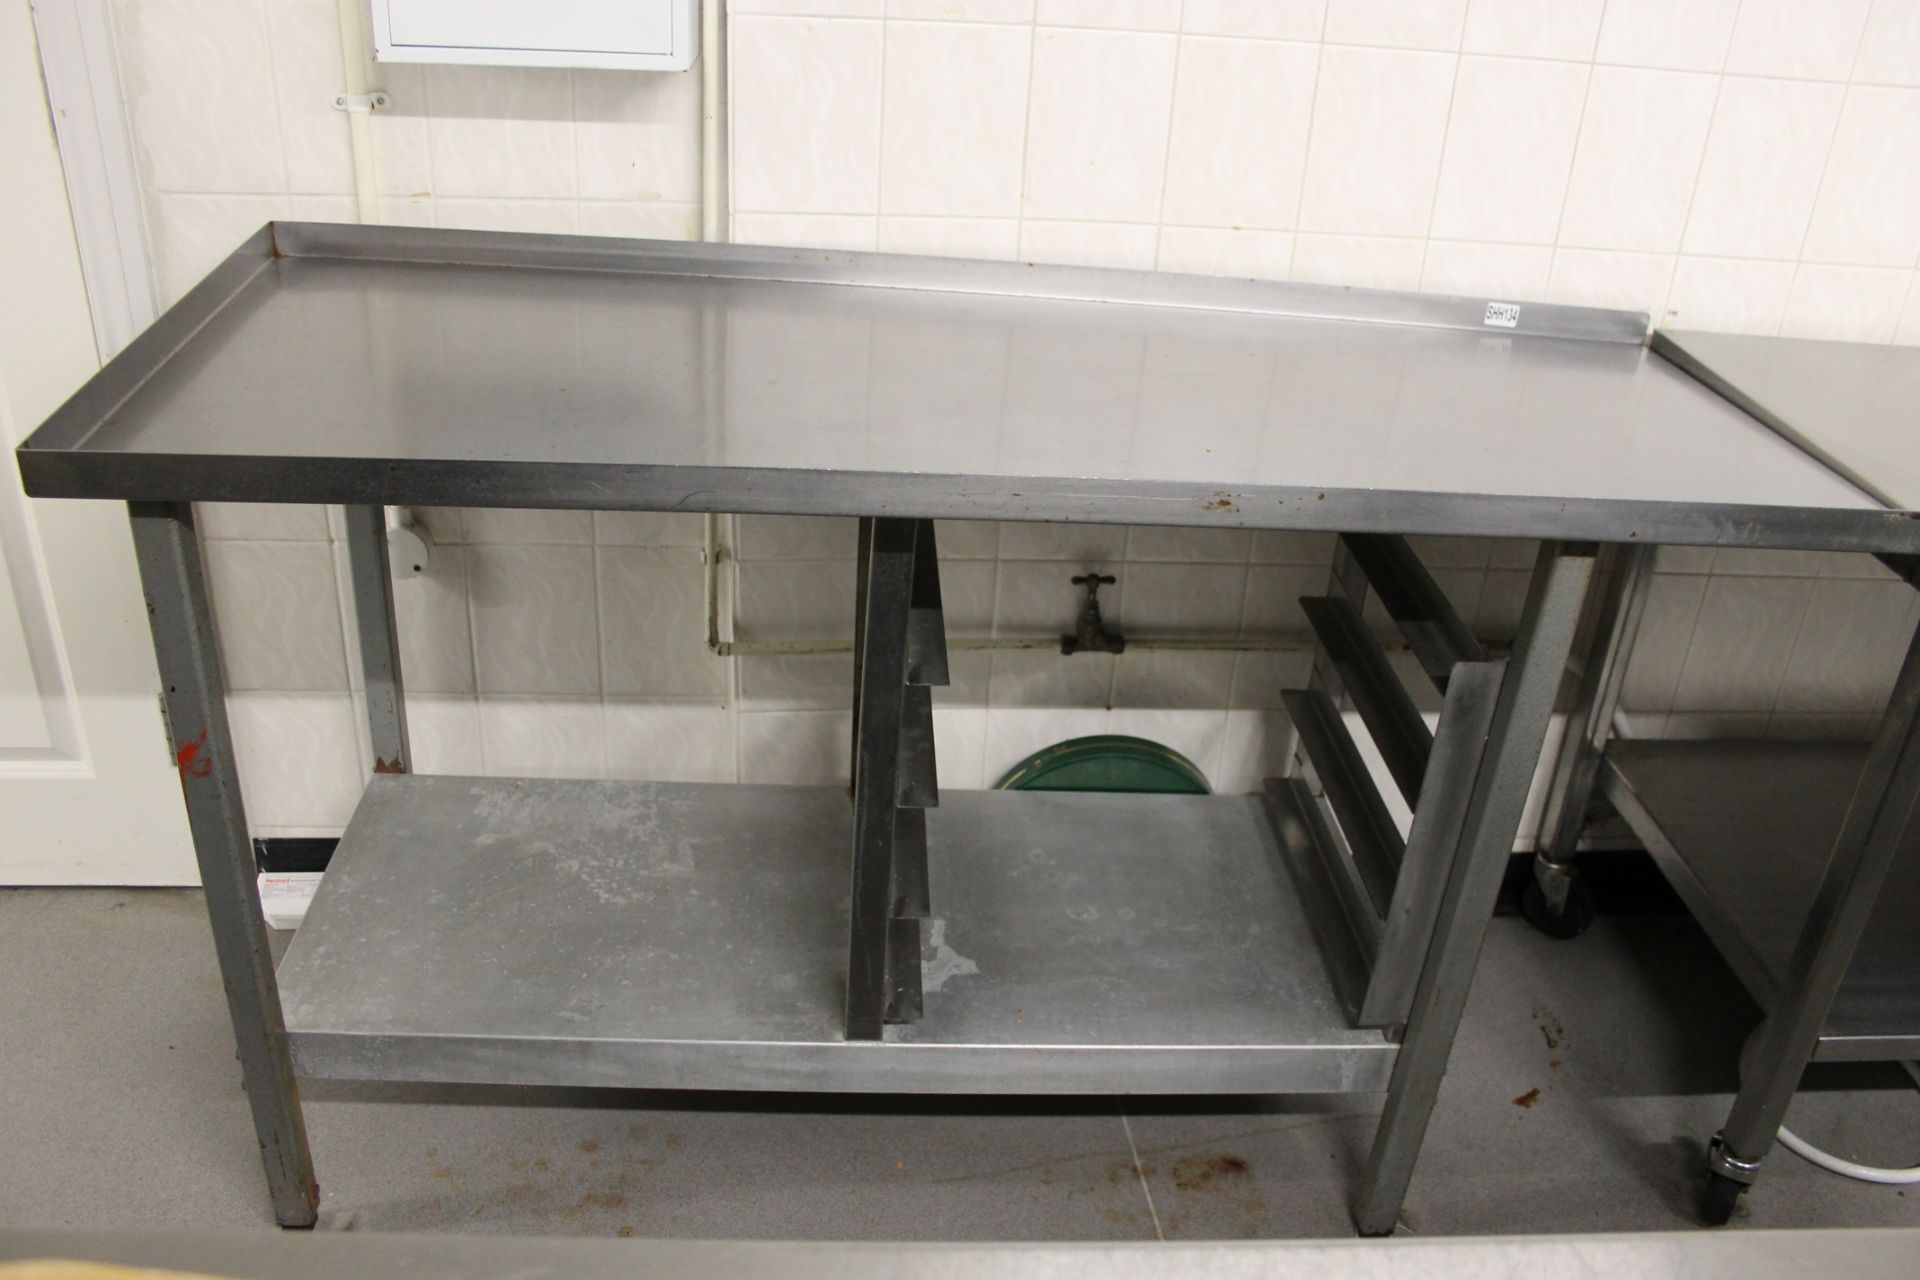 Dish Washer Feed Table with Under Tray Storage   W155cm x H92cm x D60cm - Image 2 of 2